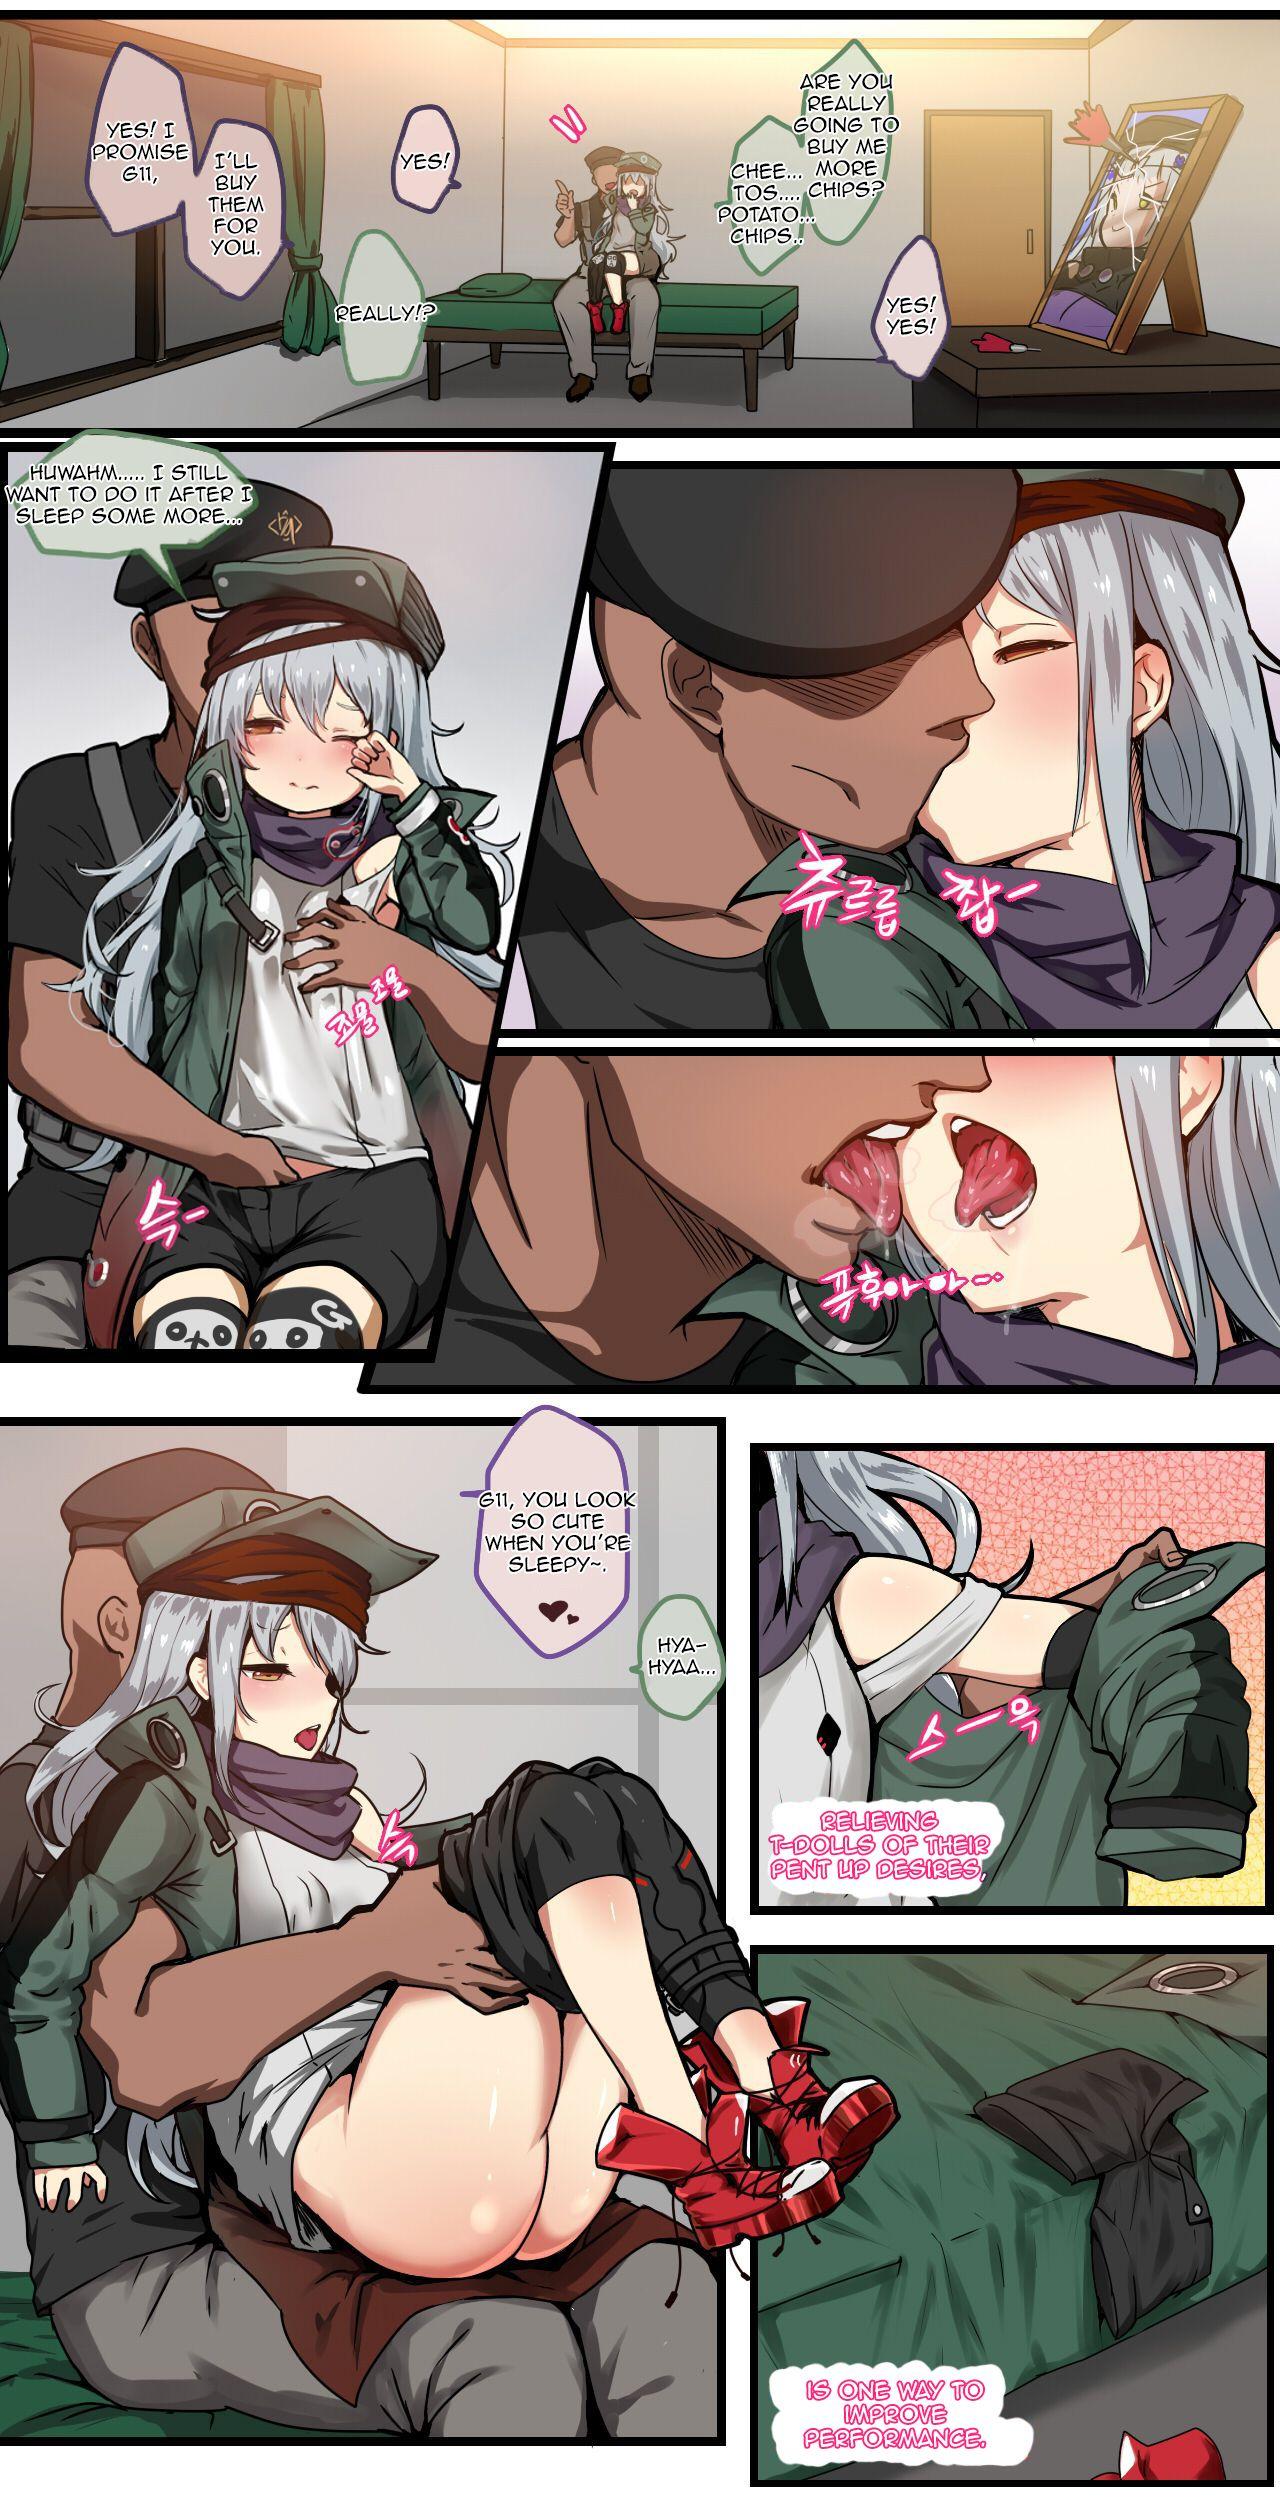 Tanga How to use dolls 01 - Girls frontline Blowjob - Page 2